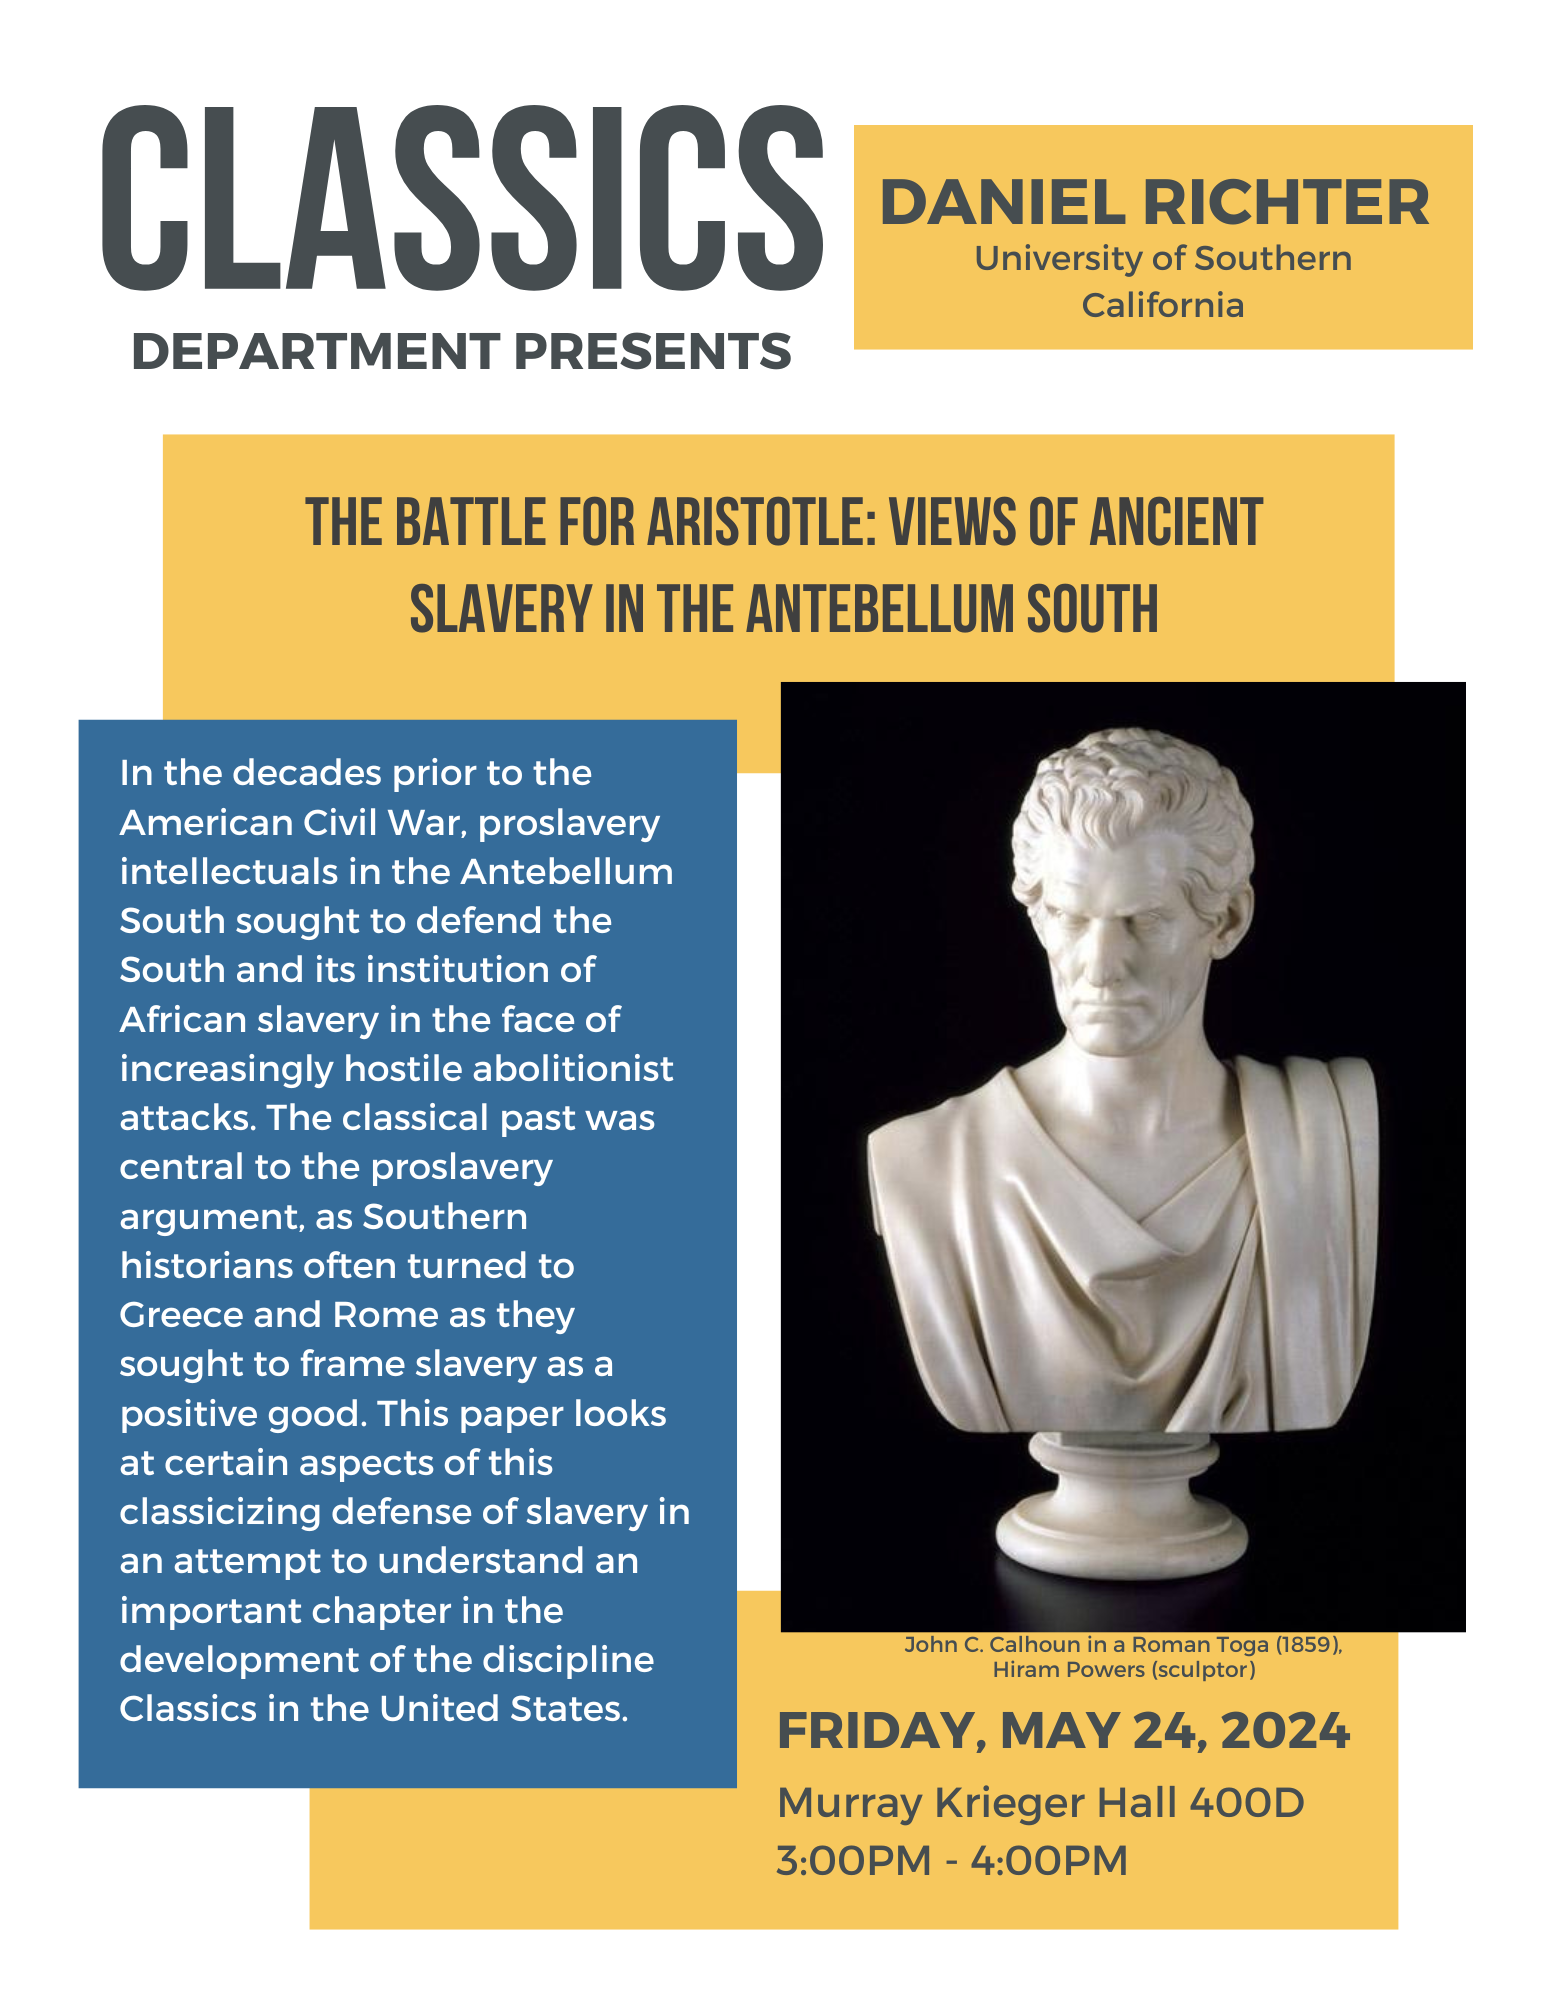 Battle for Aristotle Talk by Daniel Richter on May 24, 2024 at 3pm in Murray Krieger Hall 400D